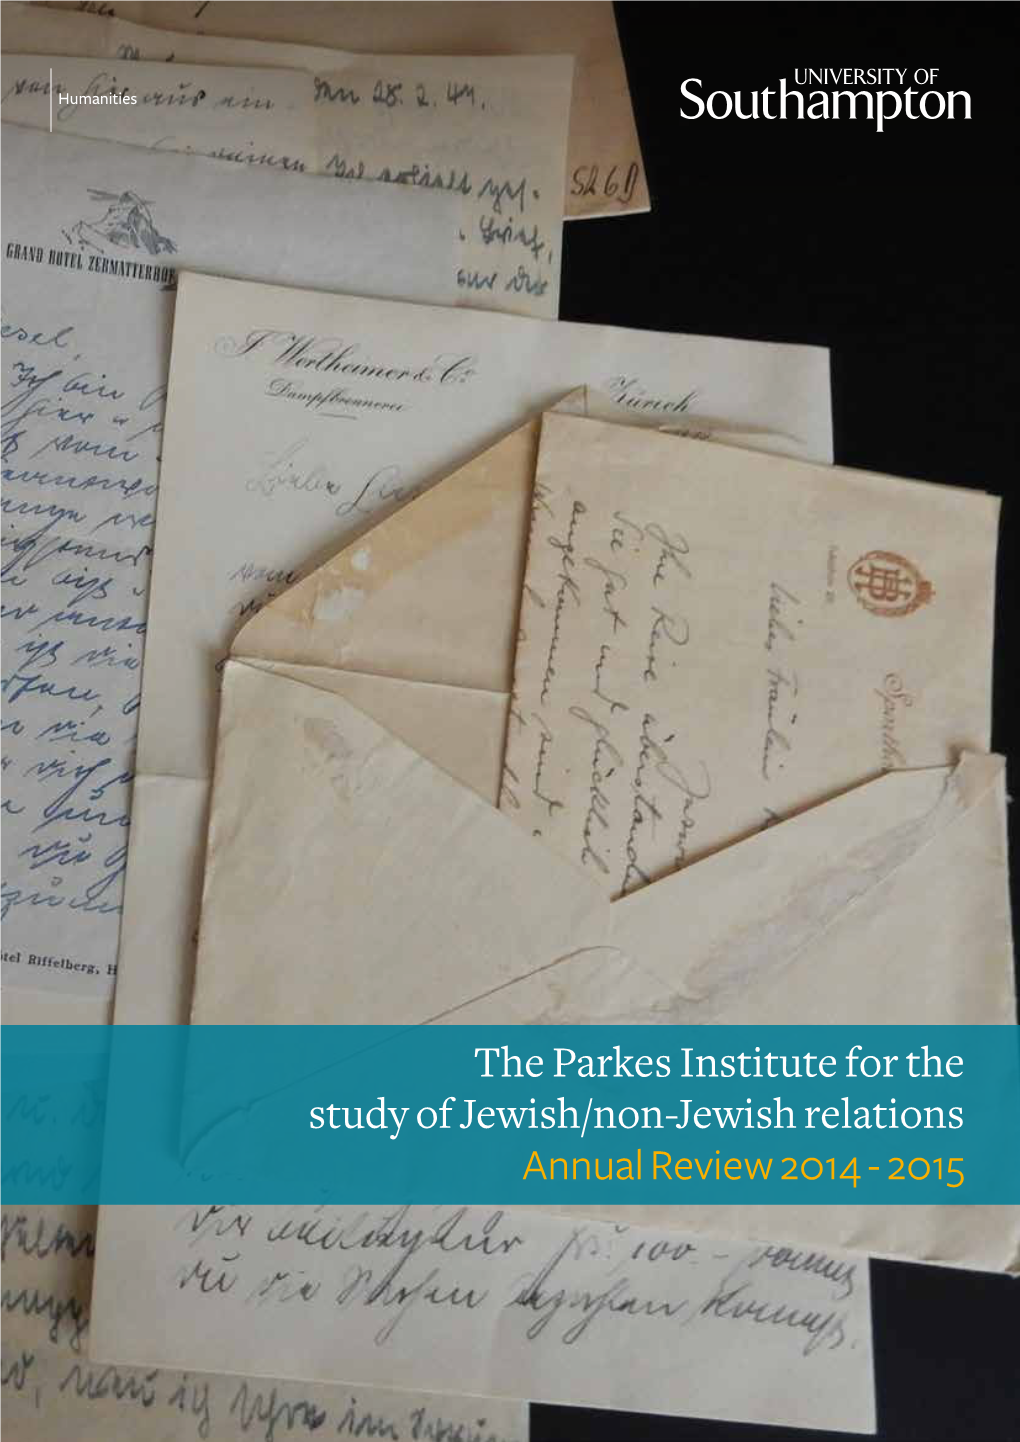 The Parkes Institute for the Study of Jewish/Non-Jewish Relations Annual Review 2014 - 2015 50 Years After the Opening of the Parkes Library